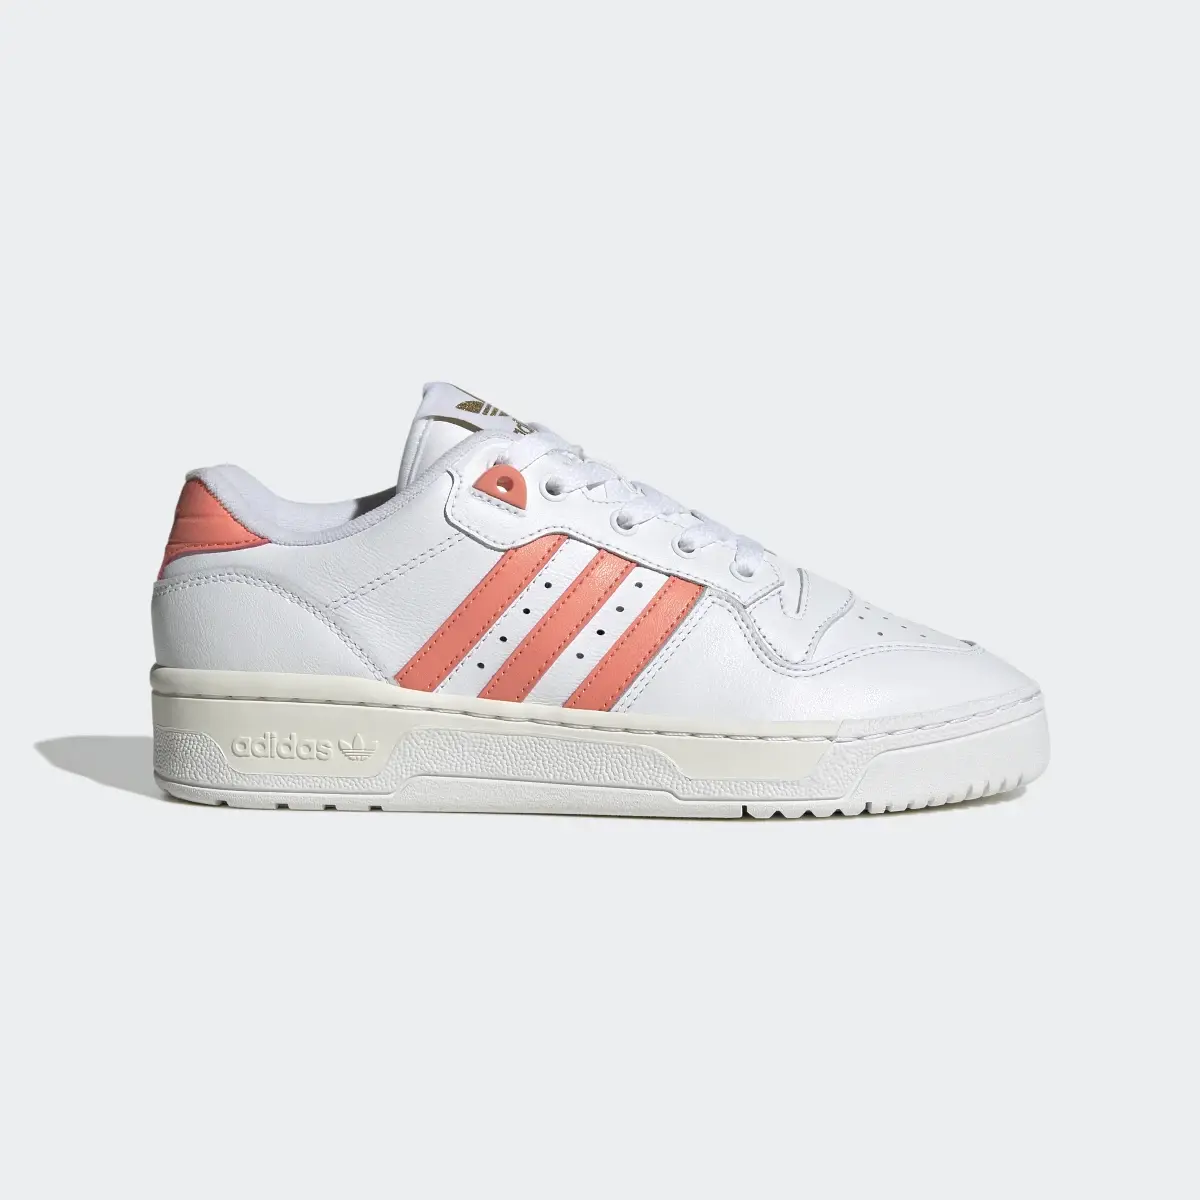 Adidas Rivalry Low Schuh. 2